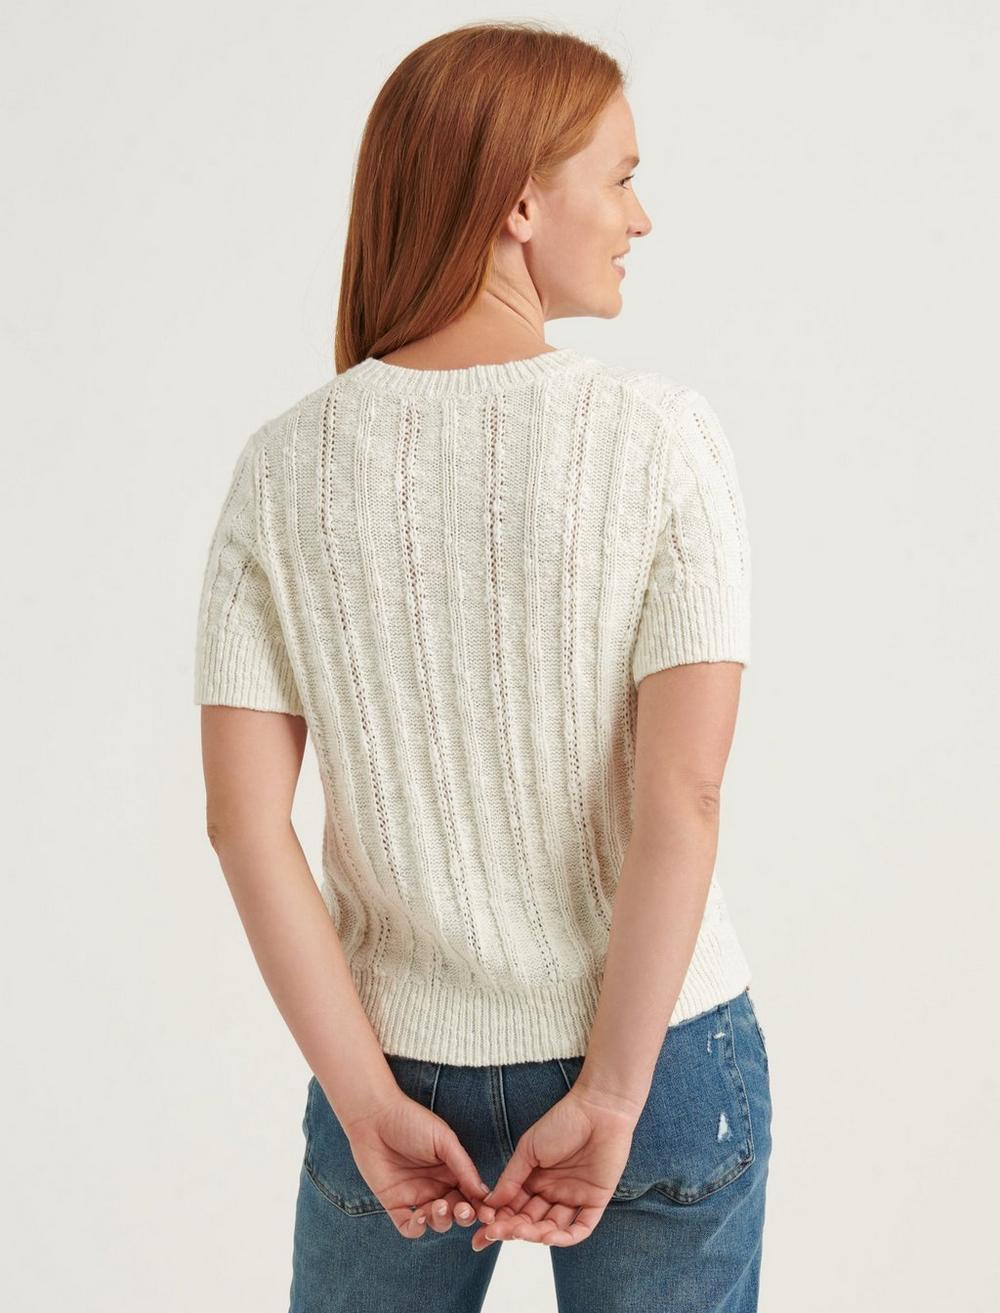 LIGHTWEIGHT SHORT SLEEVE CABLE SWEATER, image 4